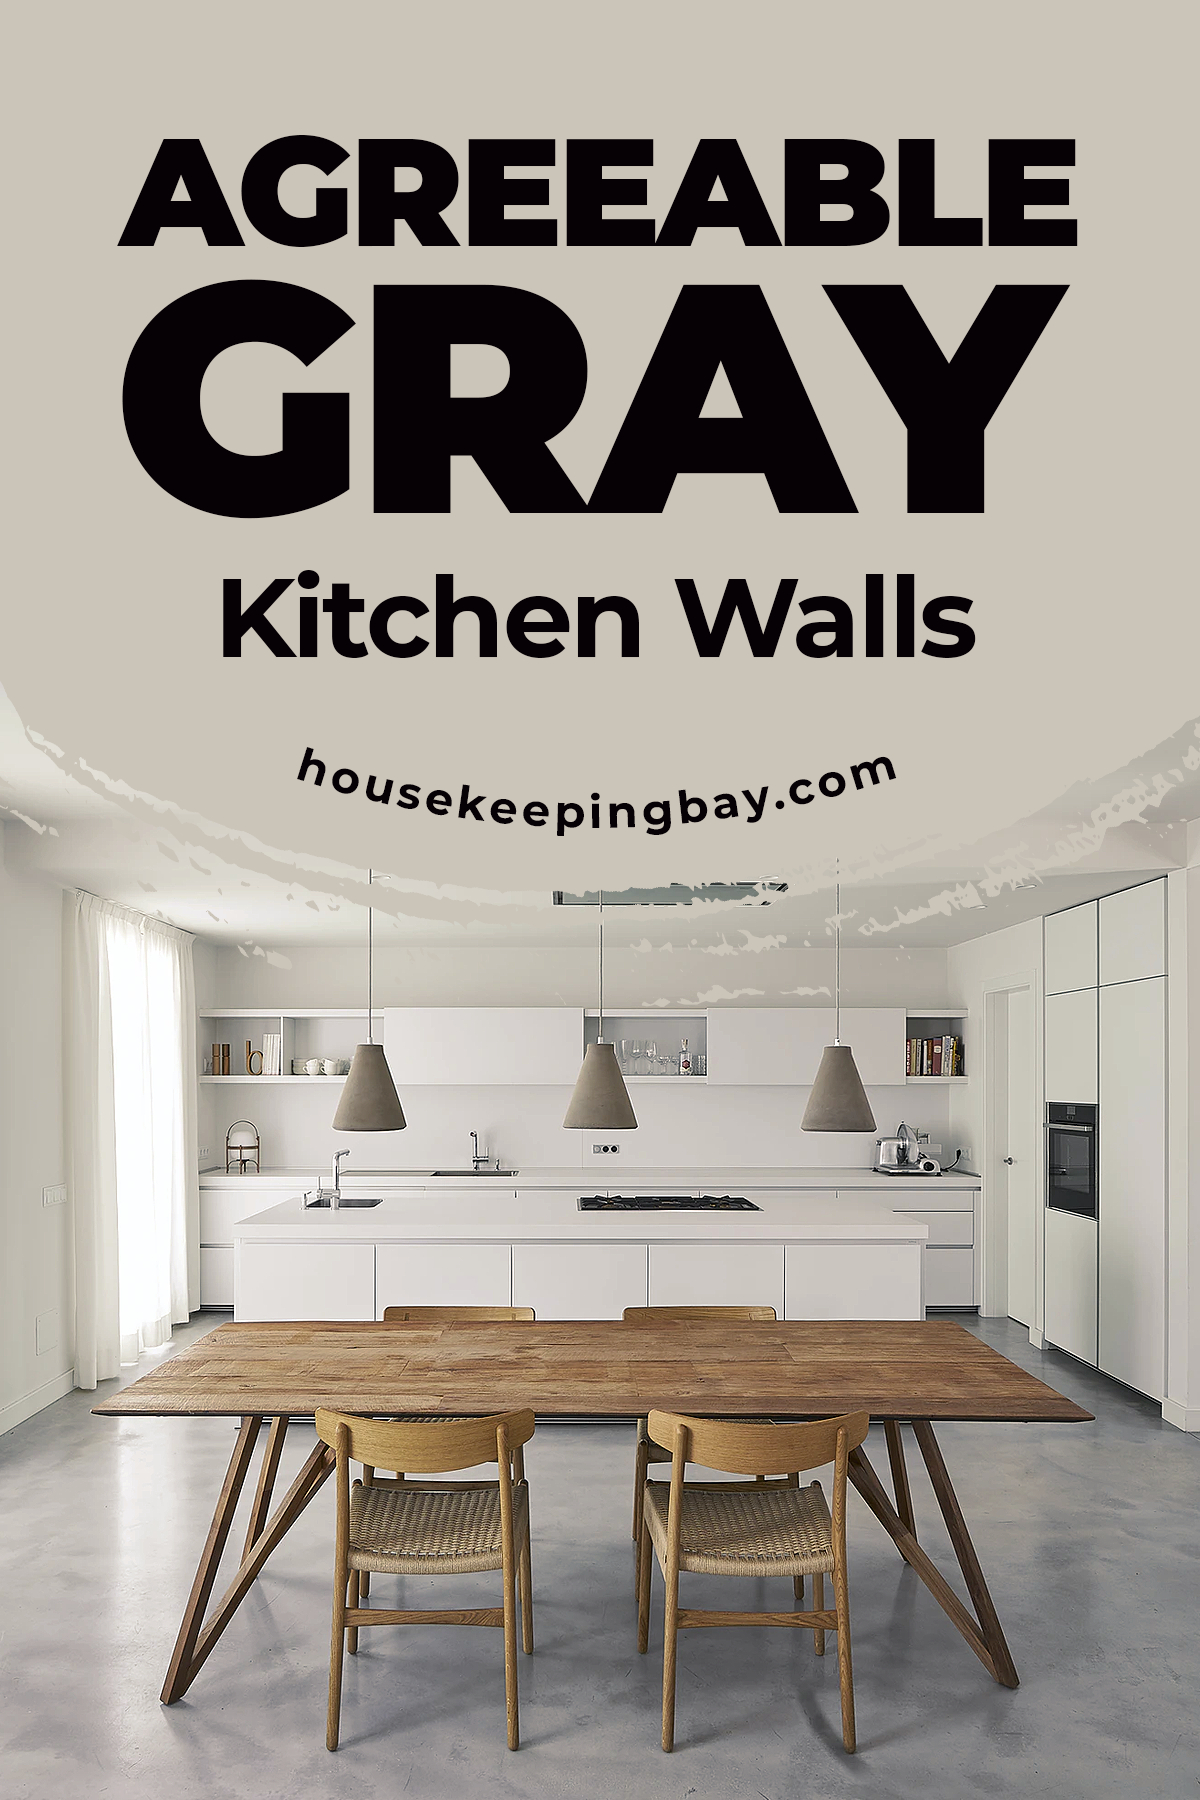 Agreeable gray kitchen walls